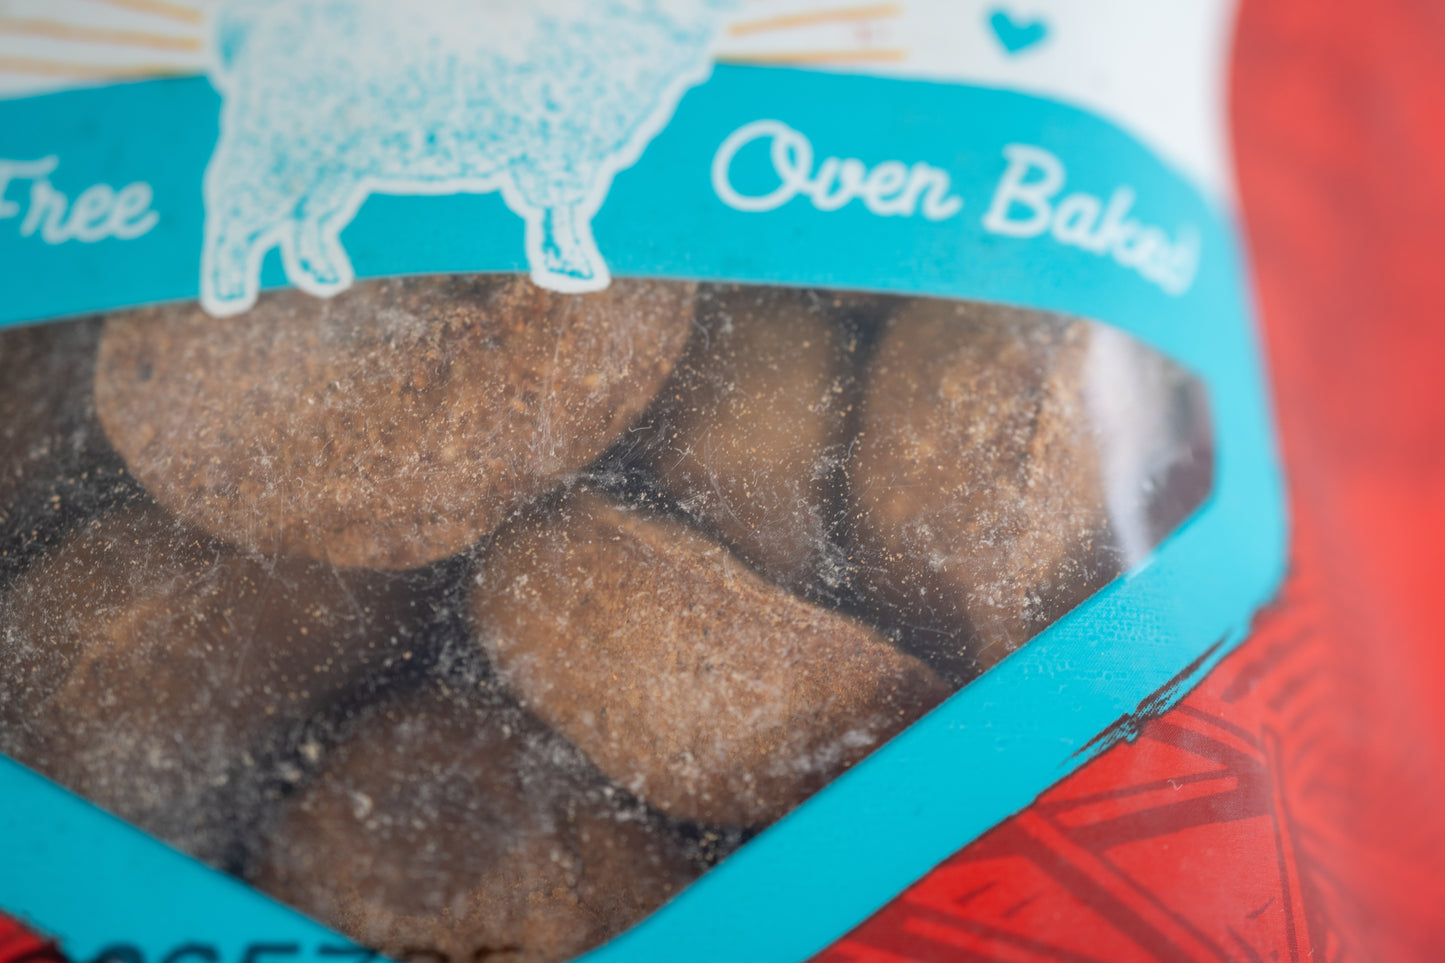 Close-up view of the raw coated dog biscuits.